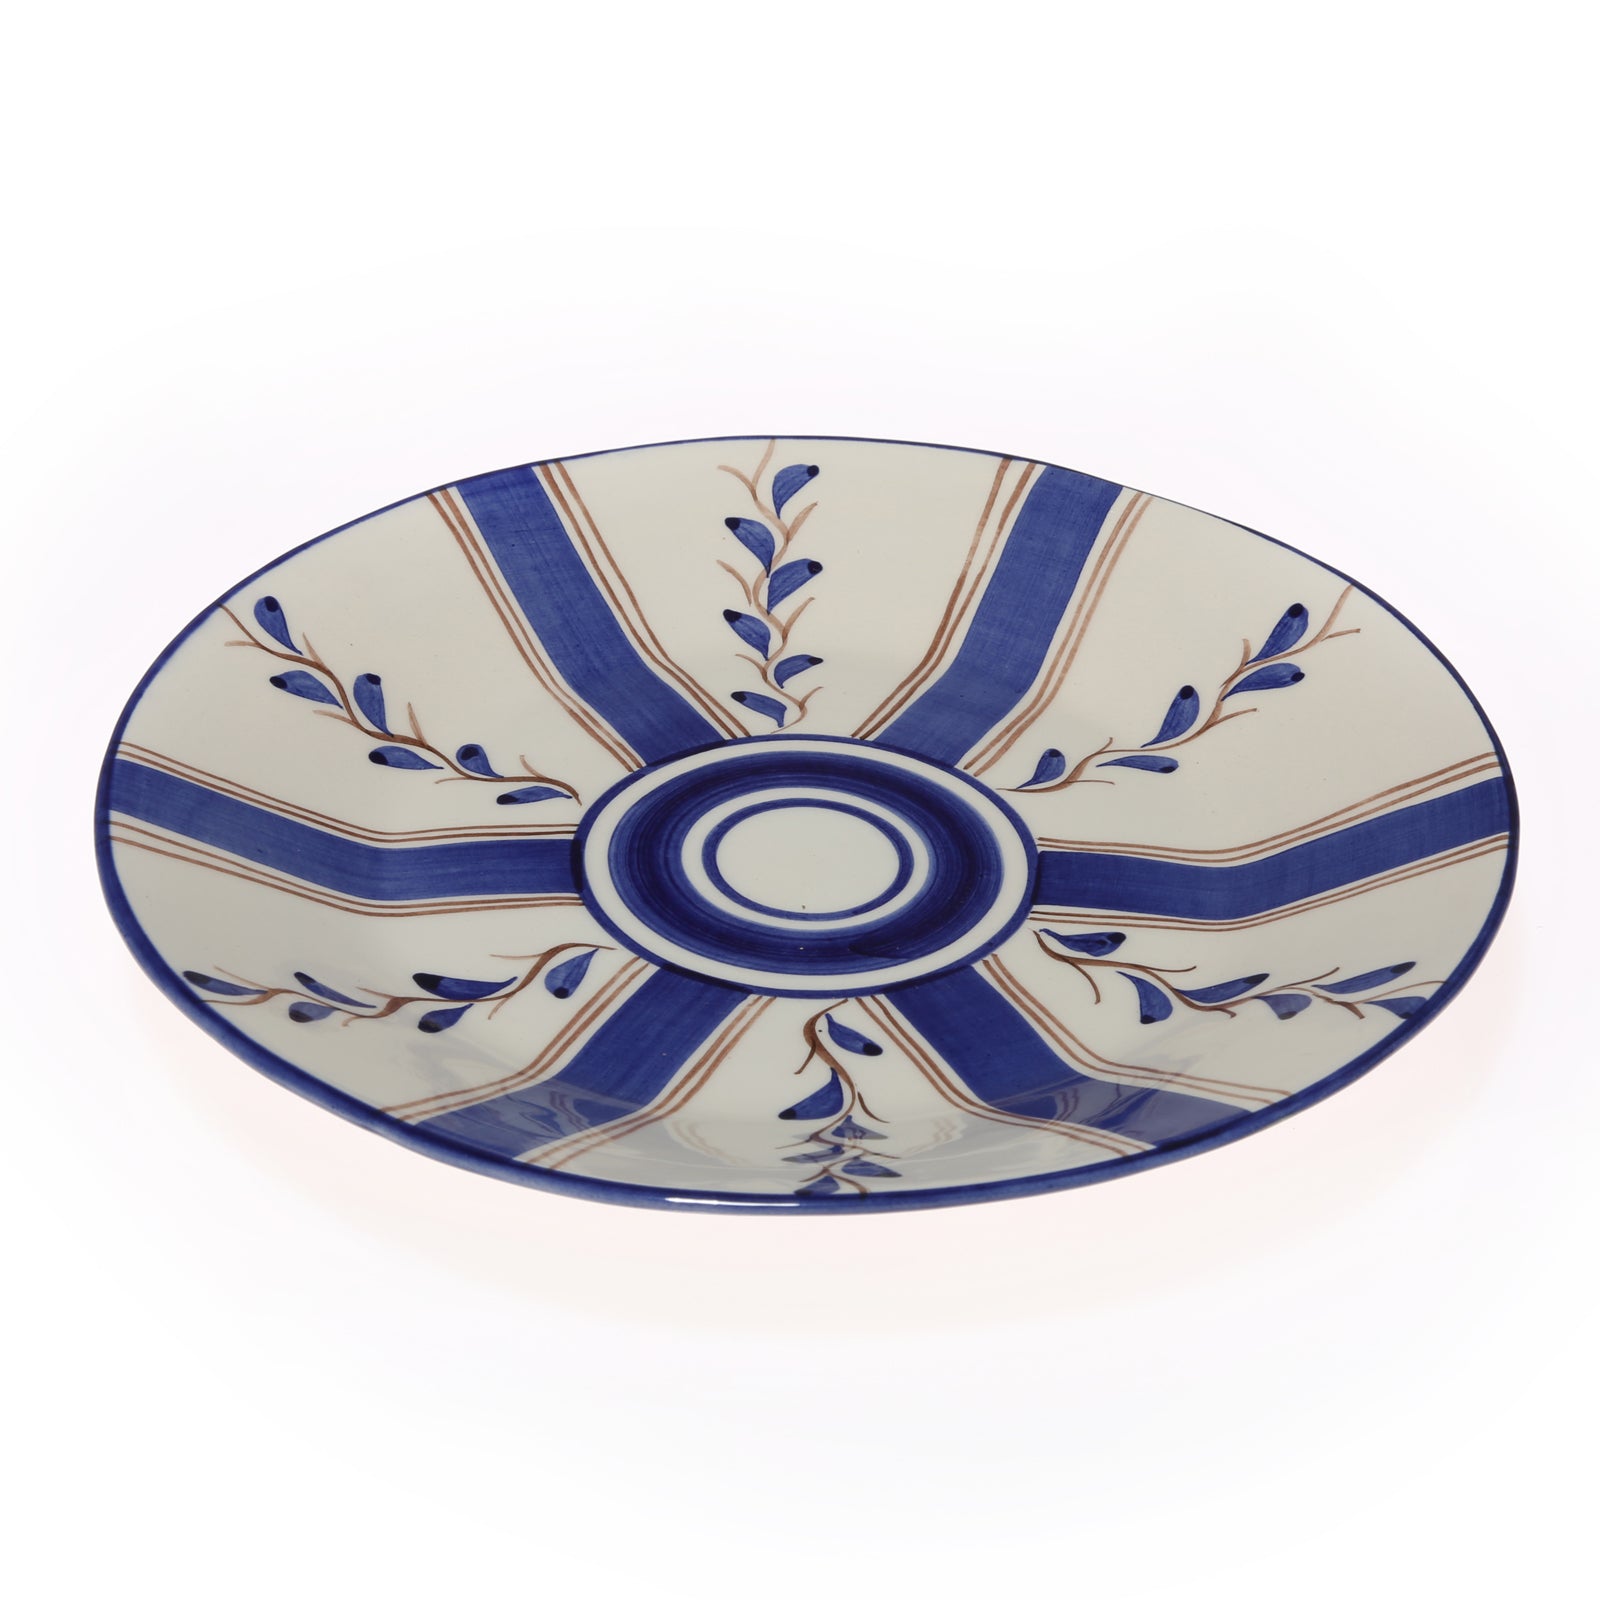 Simply Elegant Blue and White Dessert Plates - set of 4 – The Twiggery